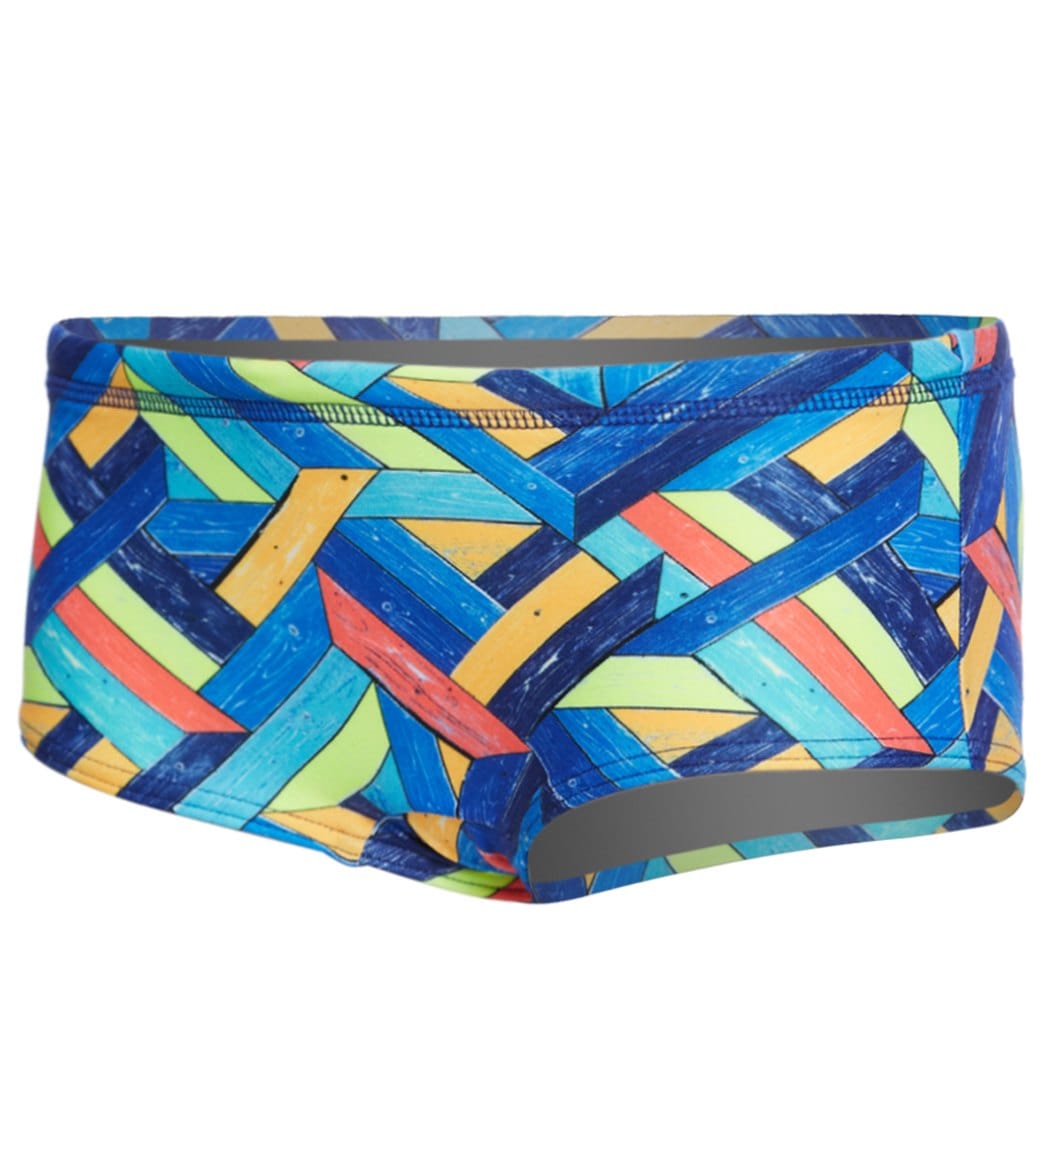 Funky Trunks Toddler Boys' Boarded Up Trunk Swimsuit - Multi 1 Polyester - Swimoutlet.com